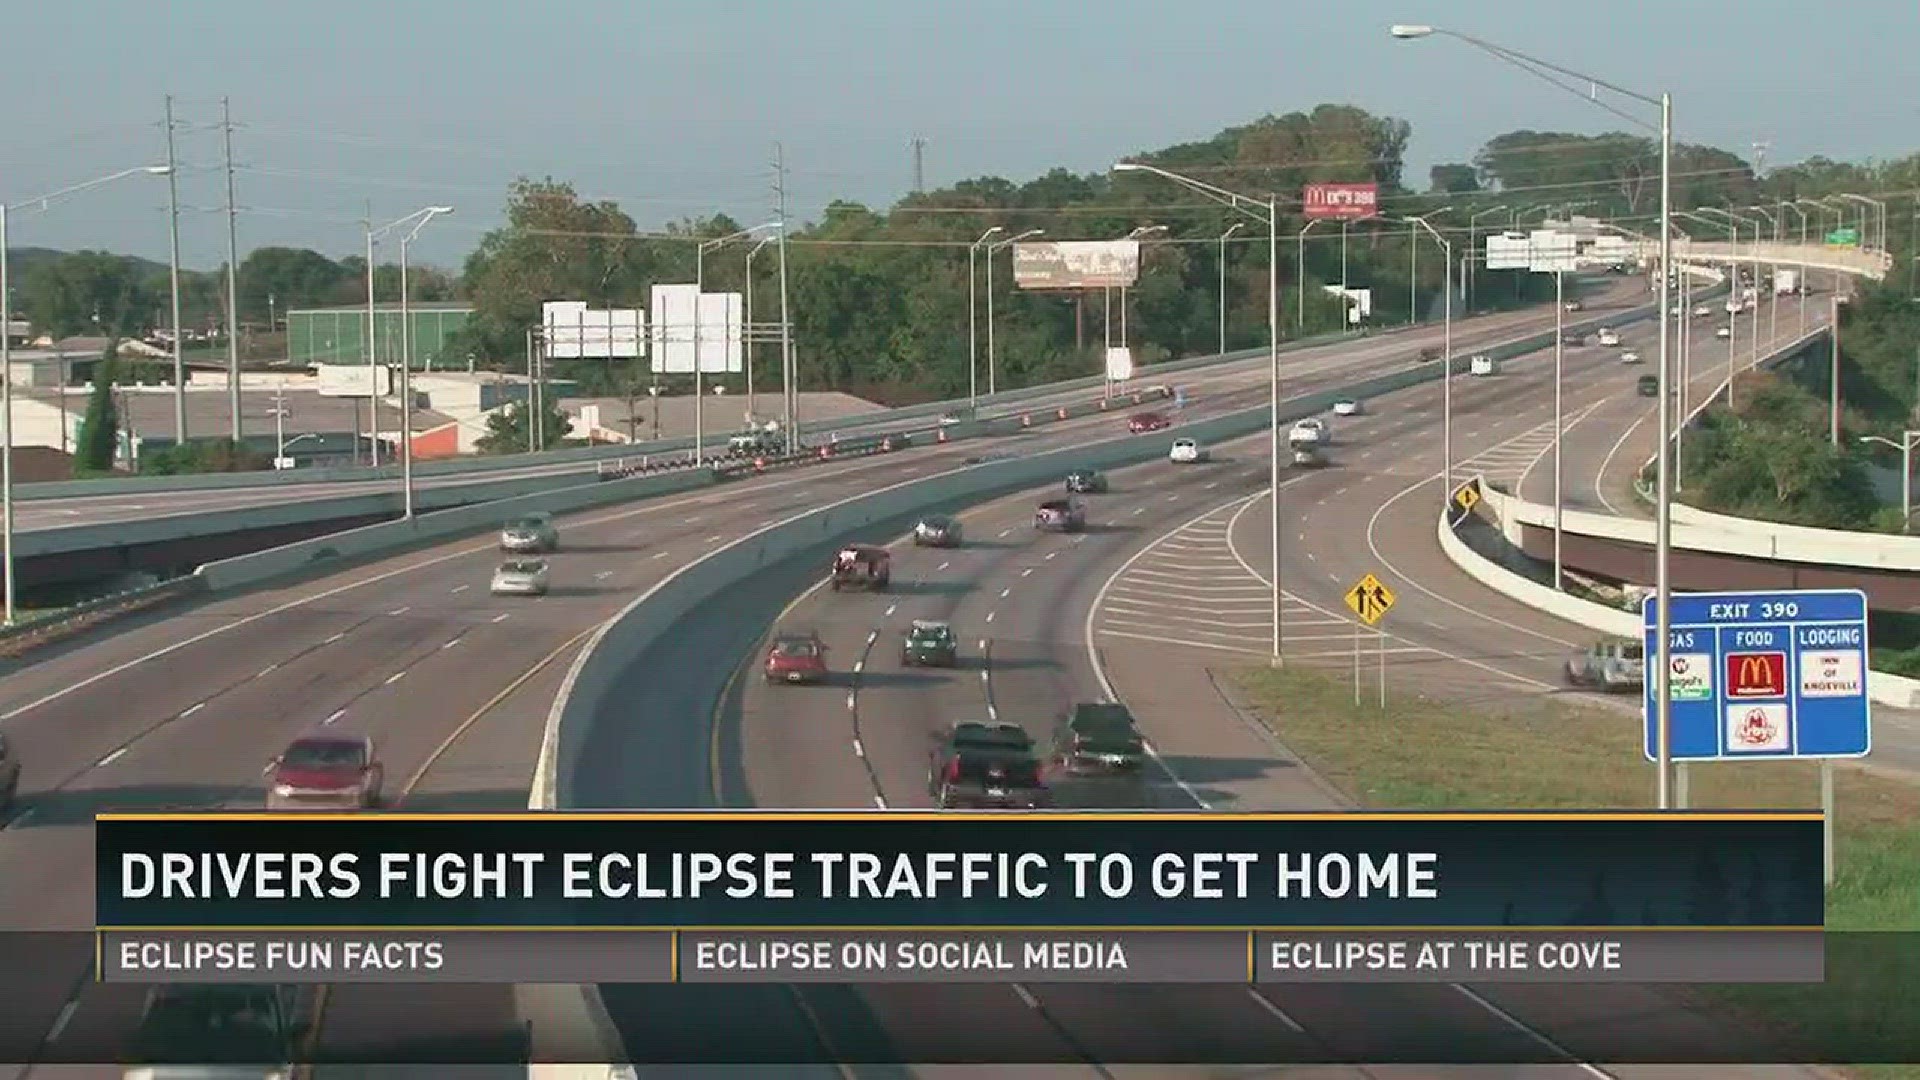 Aug. 21, 2017: After experiencing the eclipse in East Tennessee, thousands of drivers waited in long lines of traffic to get home.